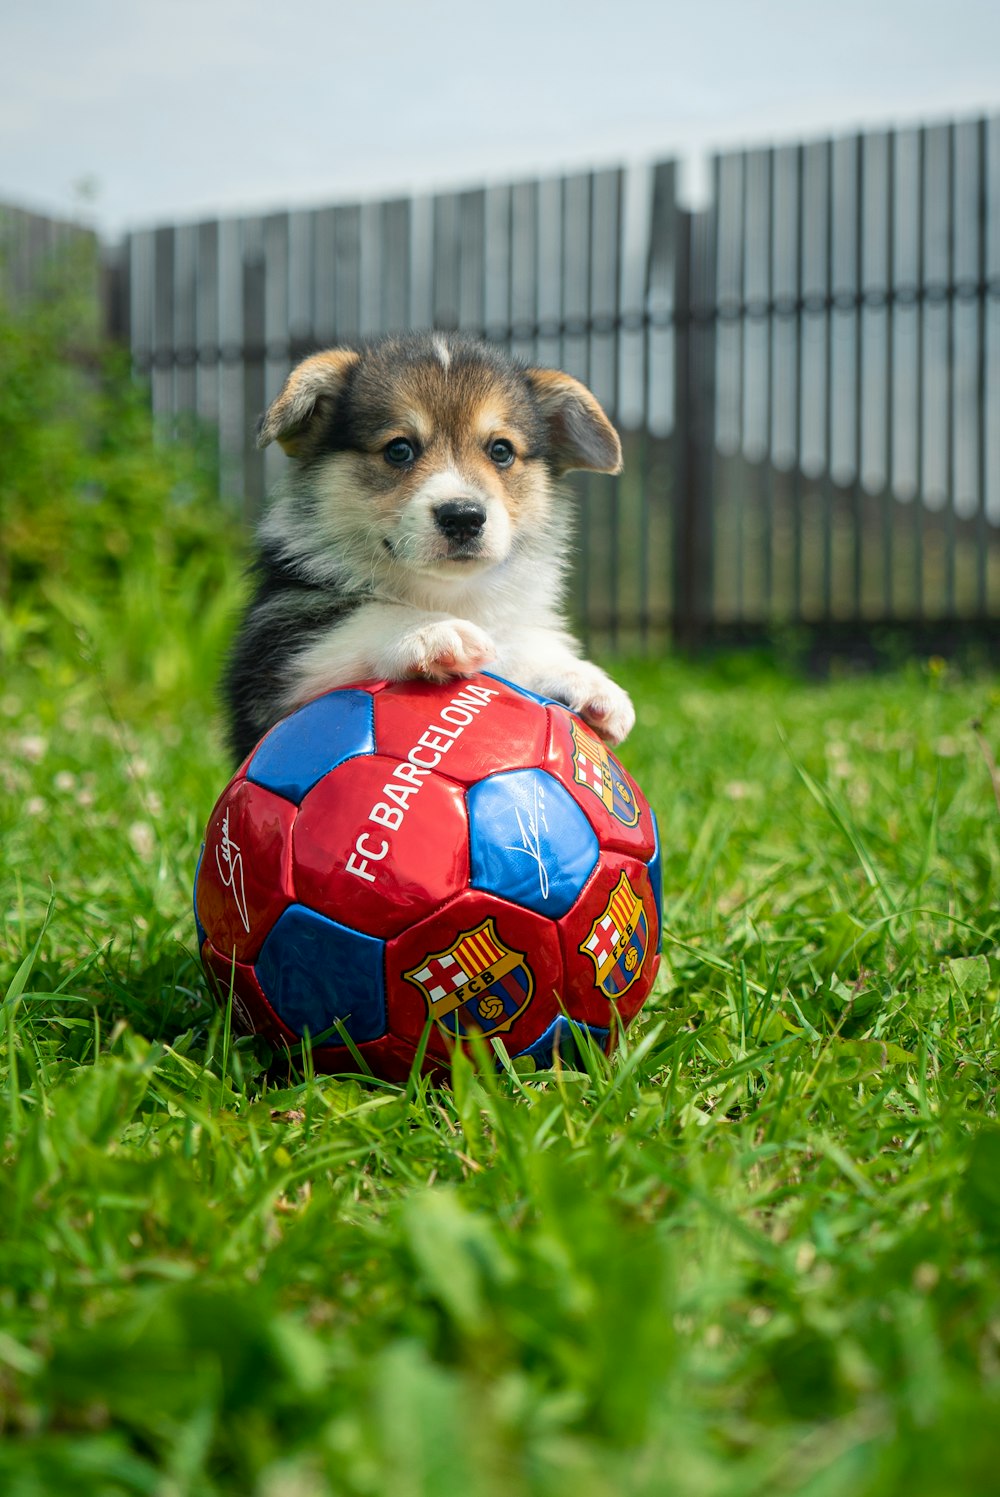 white and black puppy playing soccer ball on green grass field during daytime